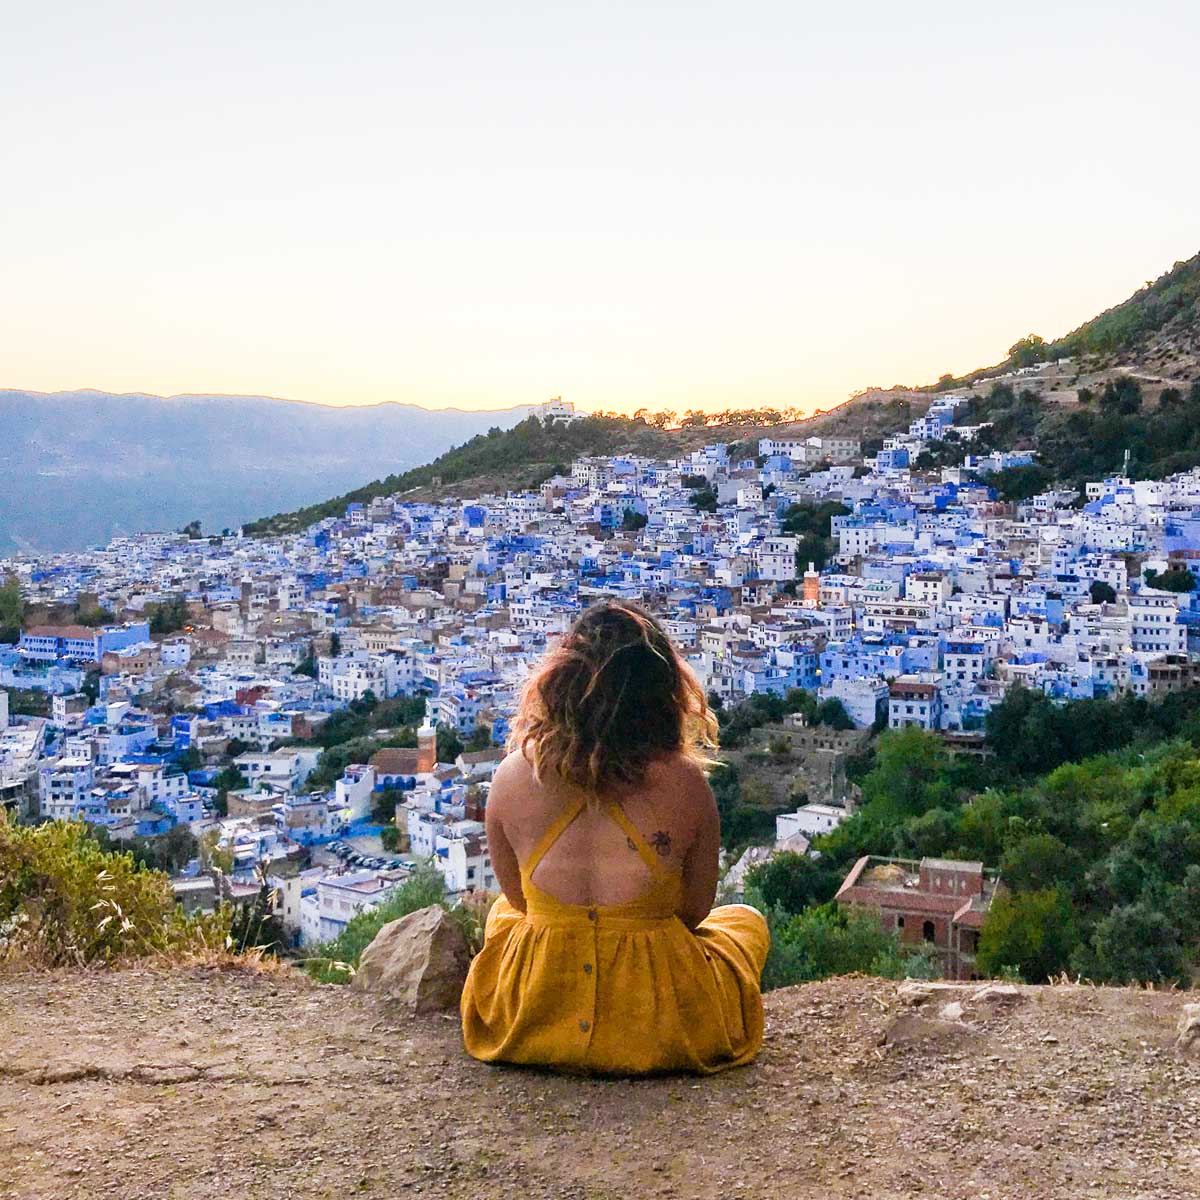 Chefchaouen During Sunset - Morocco Photo Guide